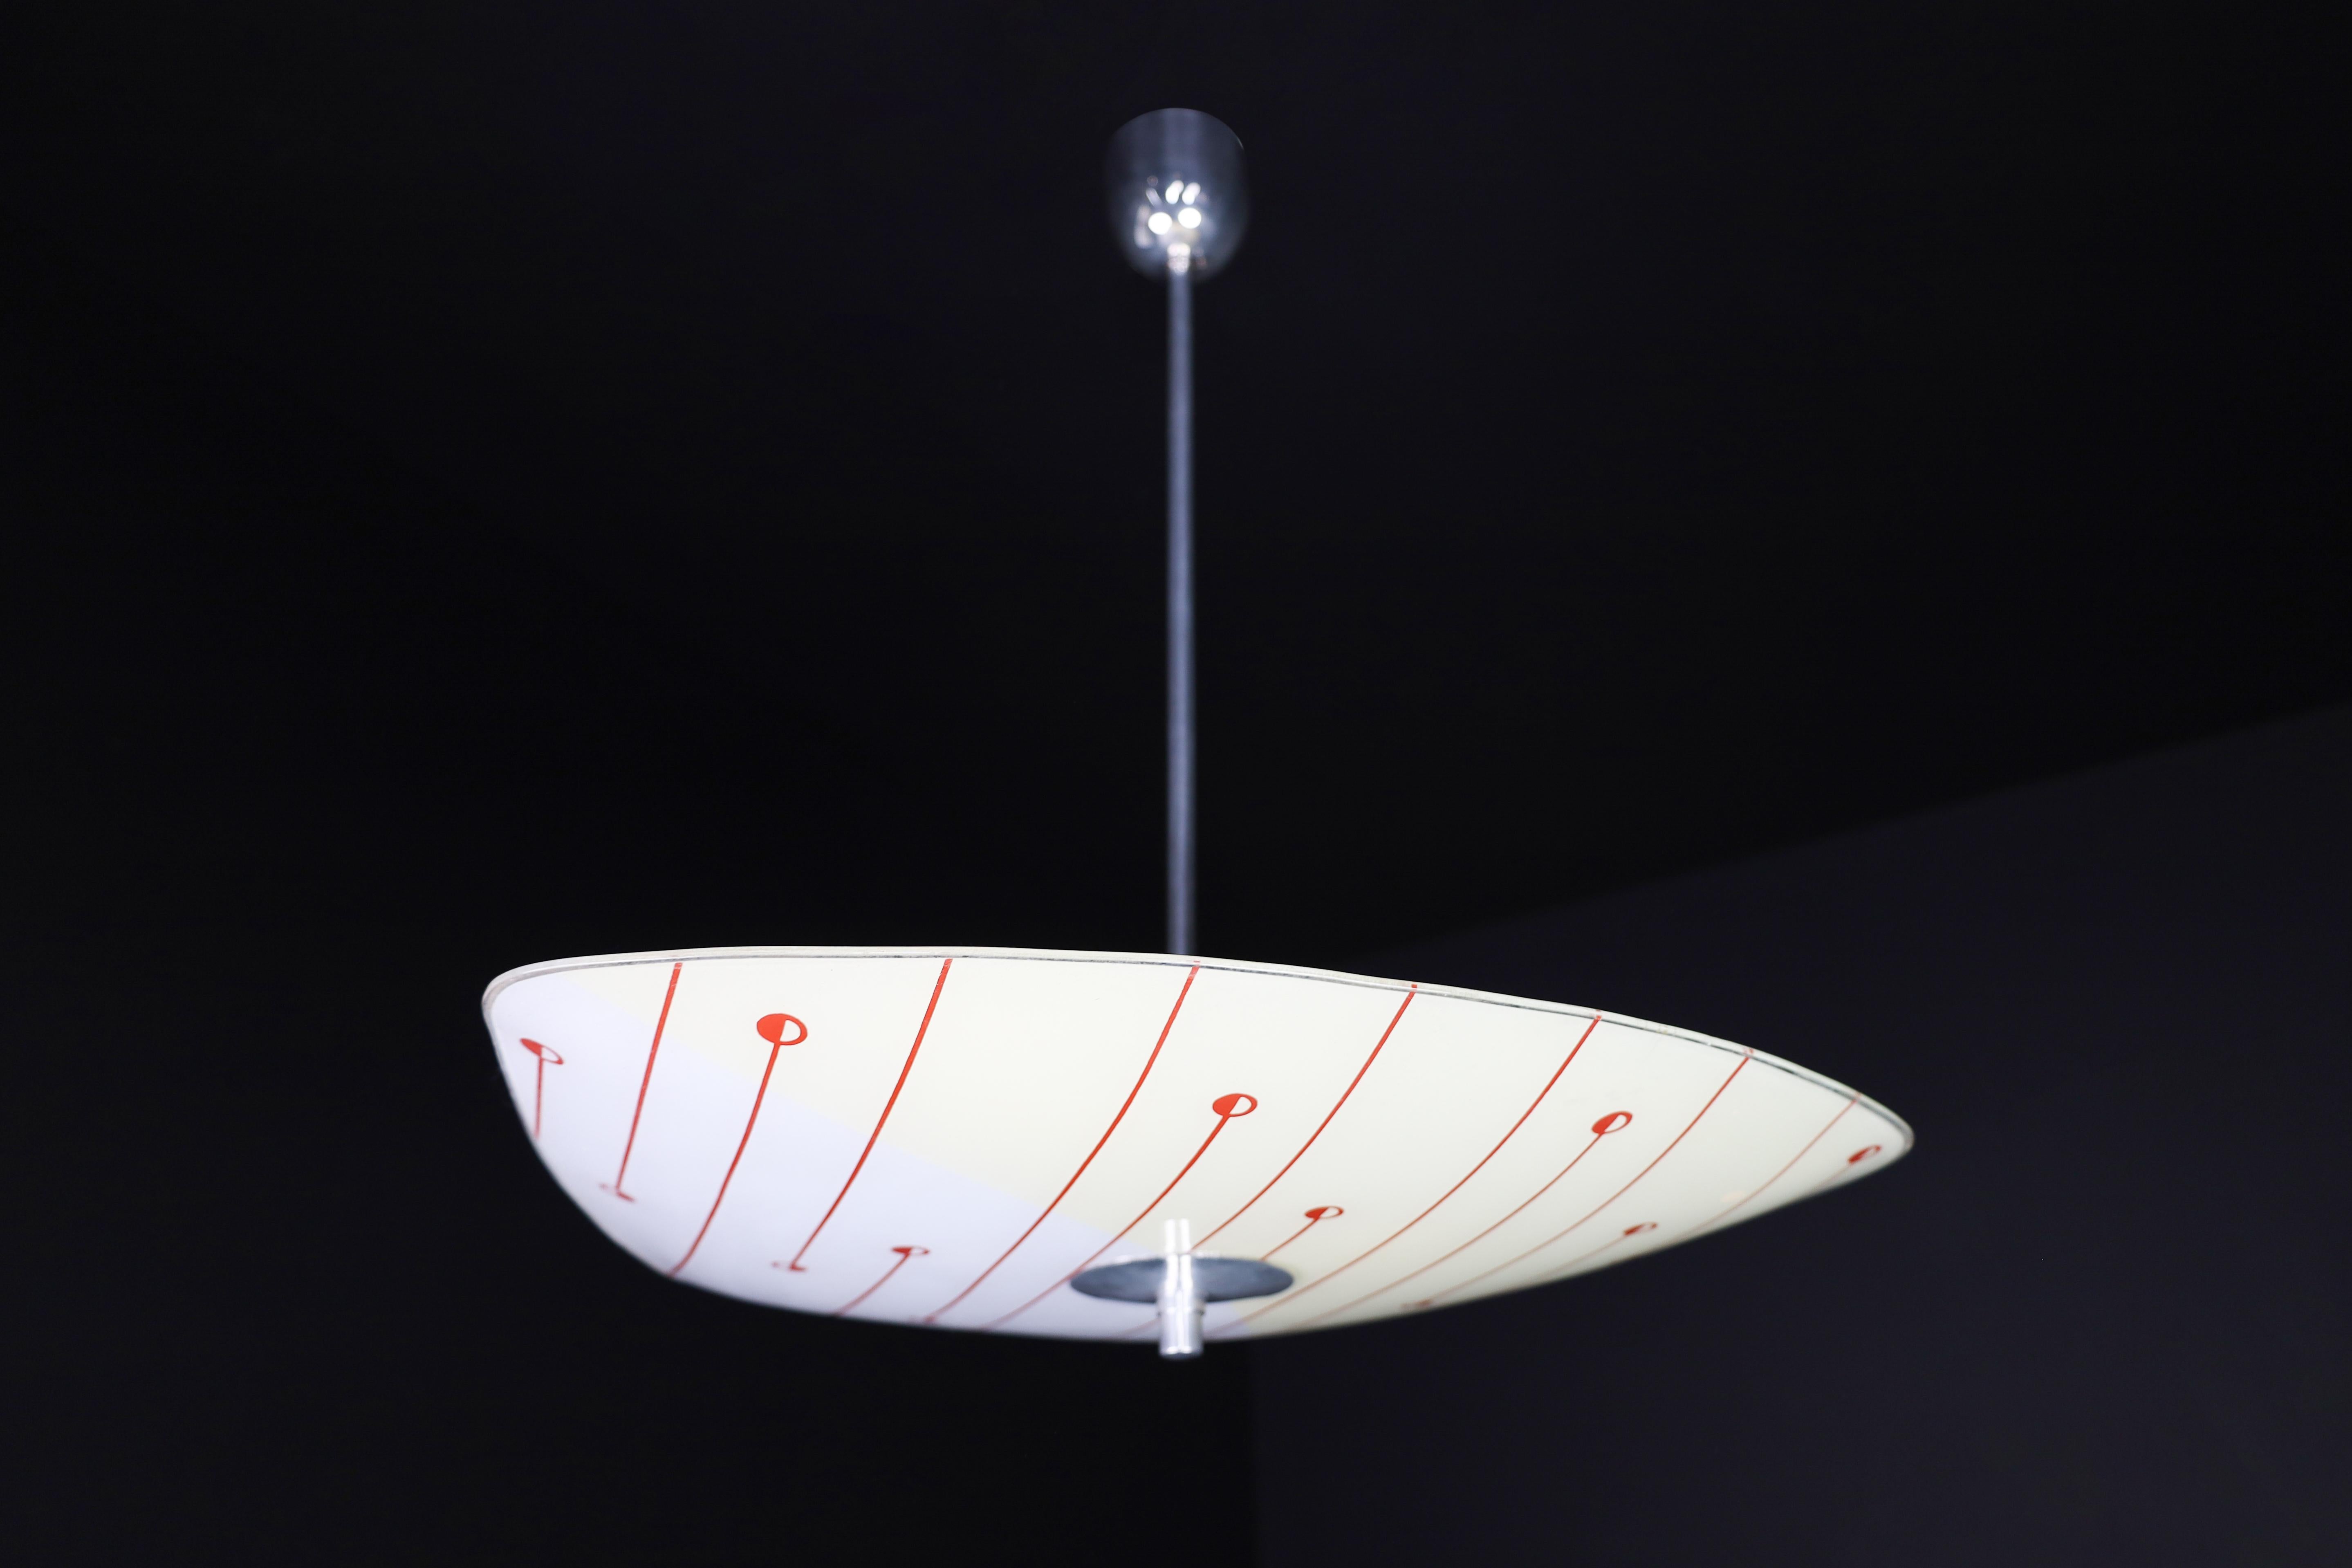 Mid-Century Glass Hanging Pendant Lamp Brussels World Expo 1958

This pendant lamp is a magnificent piece of mid-century graphics and design that was showcased at the Czechoslovakia Pavilion during the Brussels World Fair in 1958. The shade is in